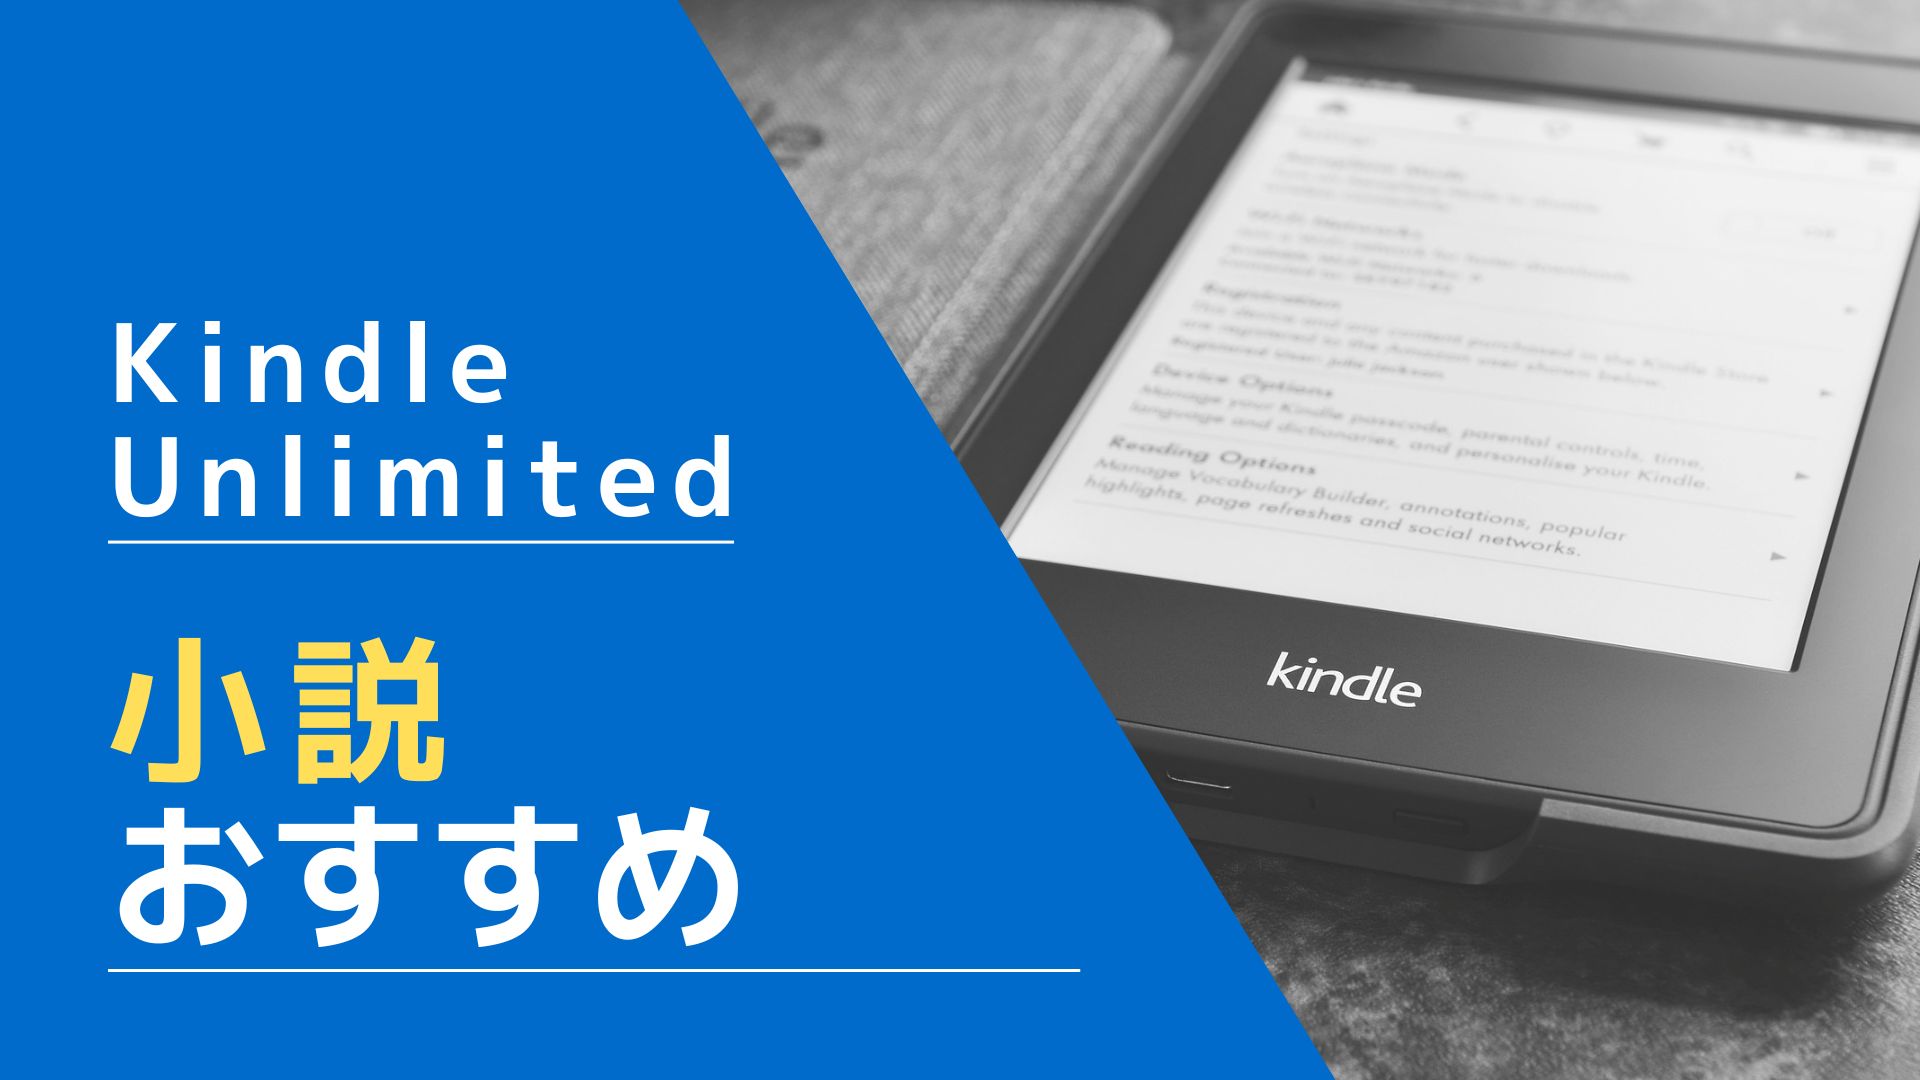 Kindle Unlimited　おすすめ小説　短編も長編も紹介します